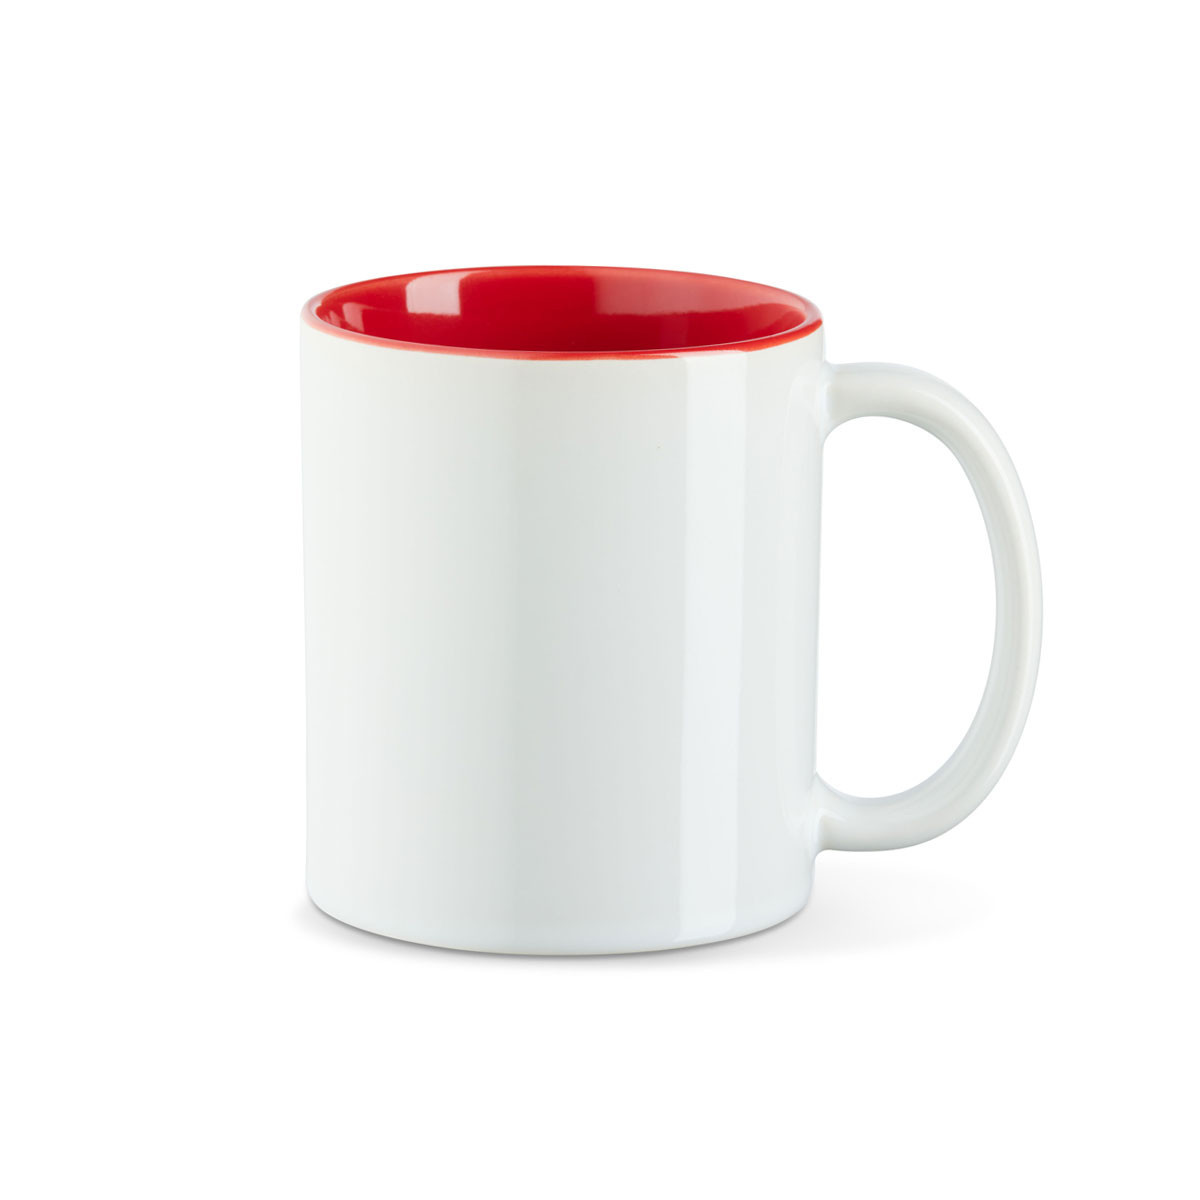  Sublitasse innen rot, 11 oz in Farbe wei?/rot